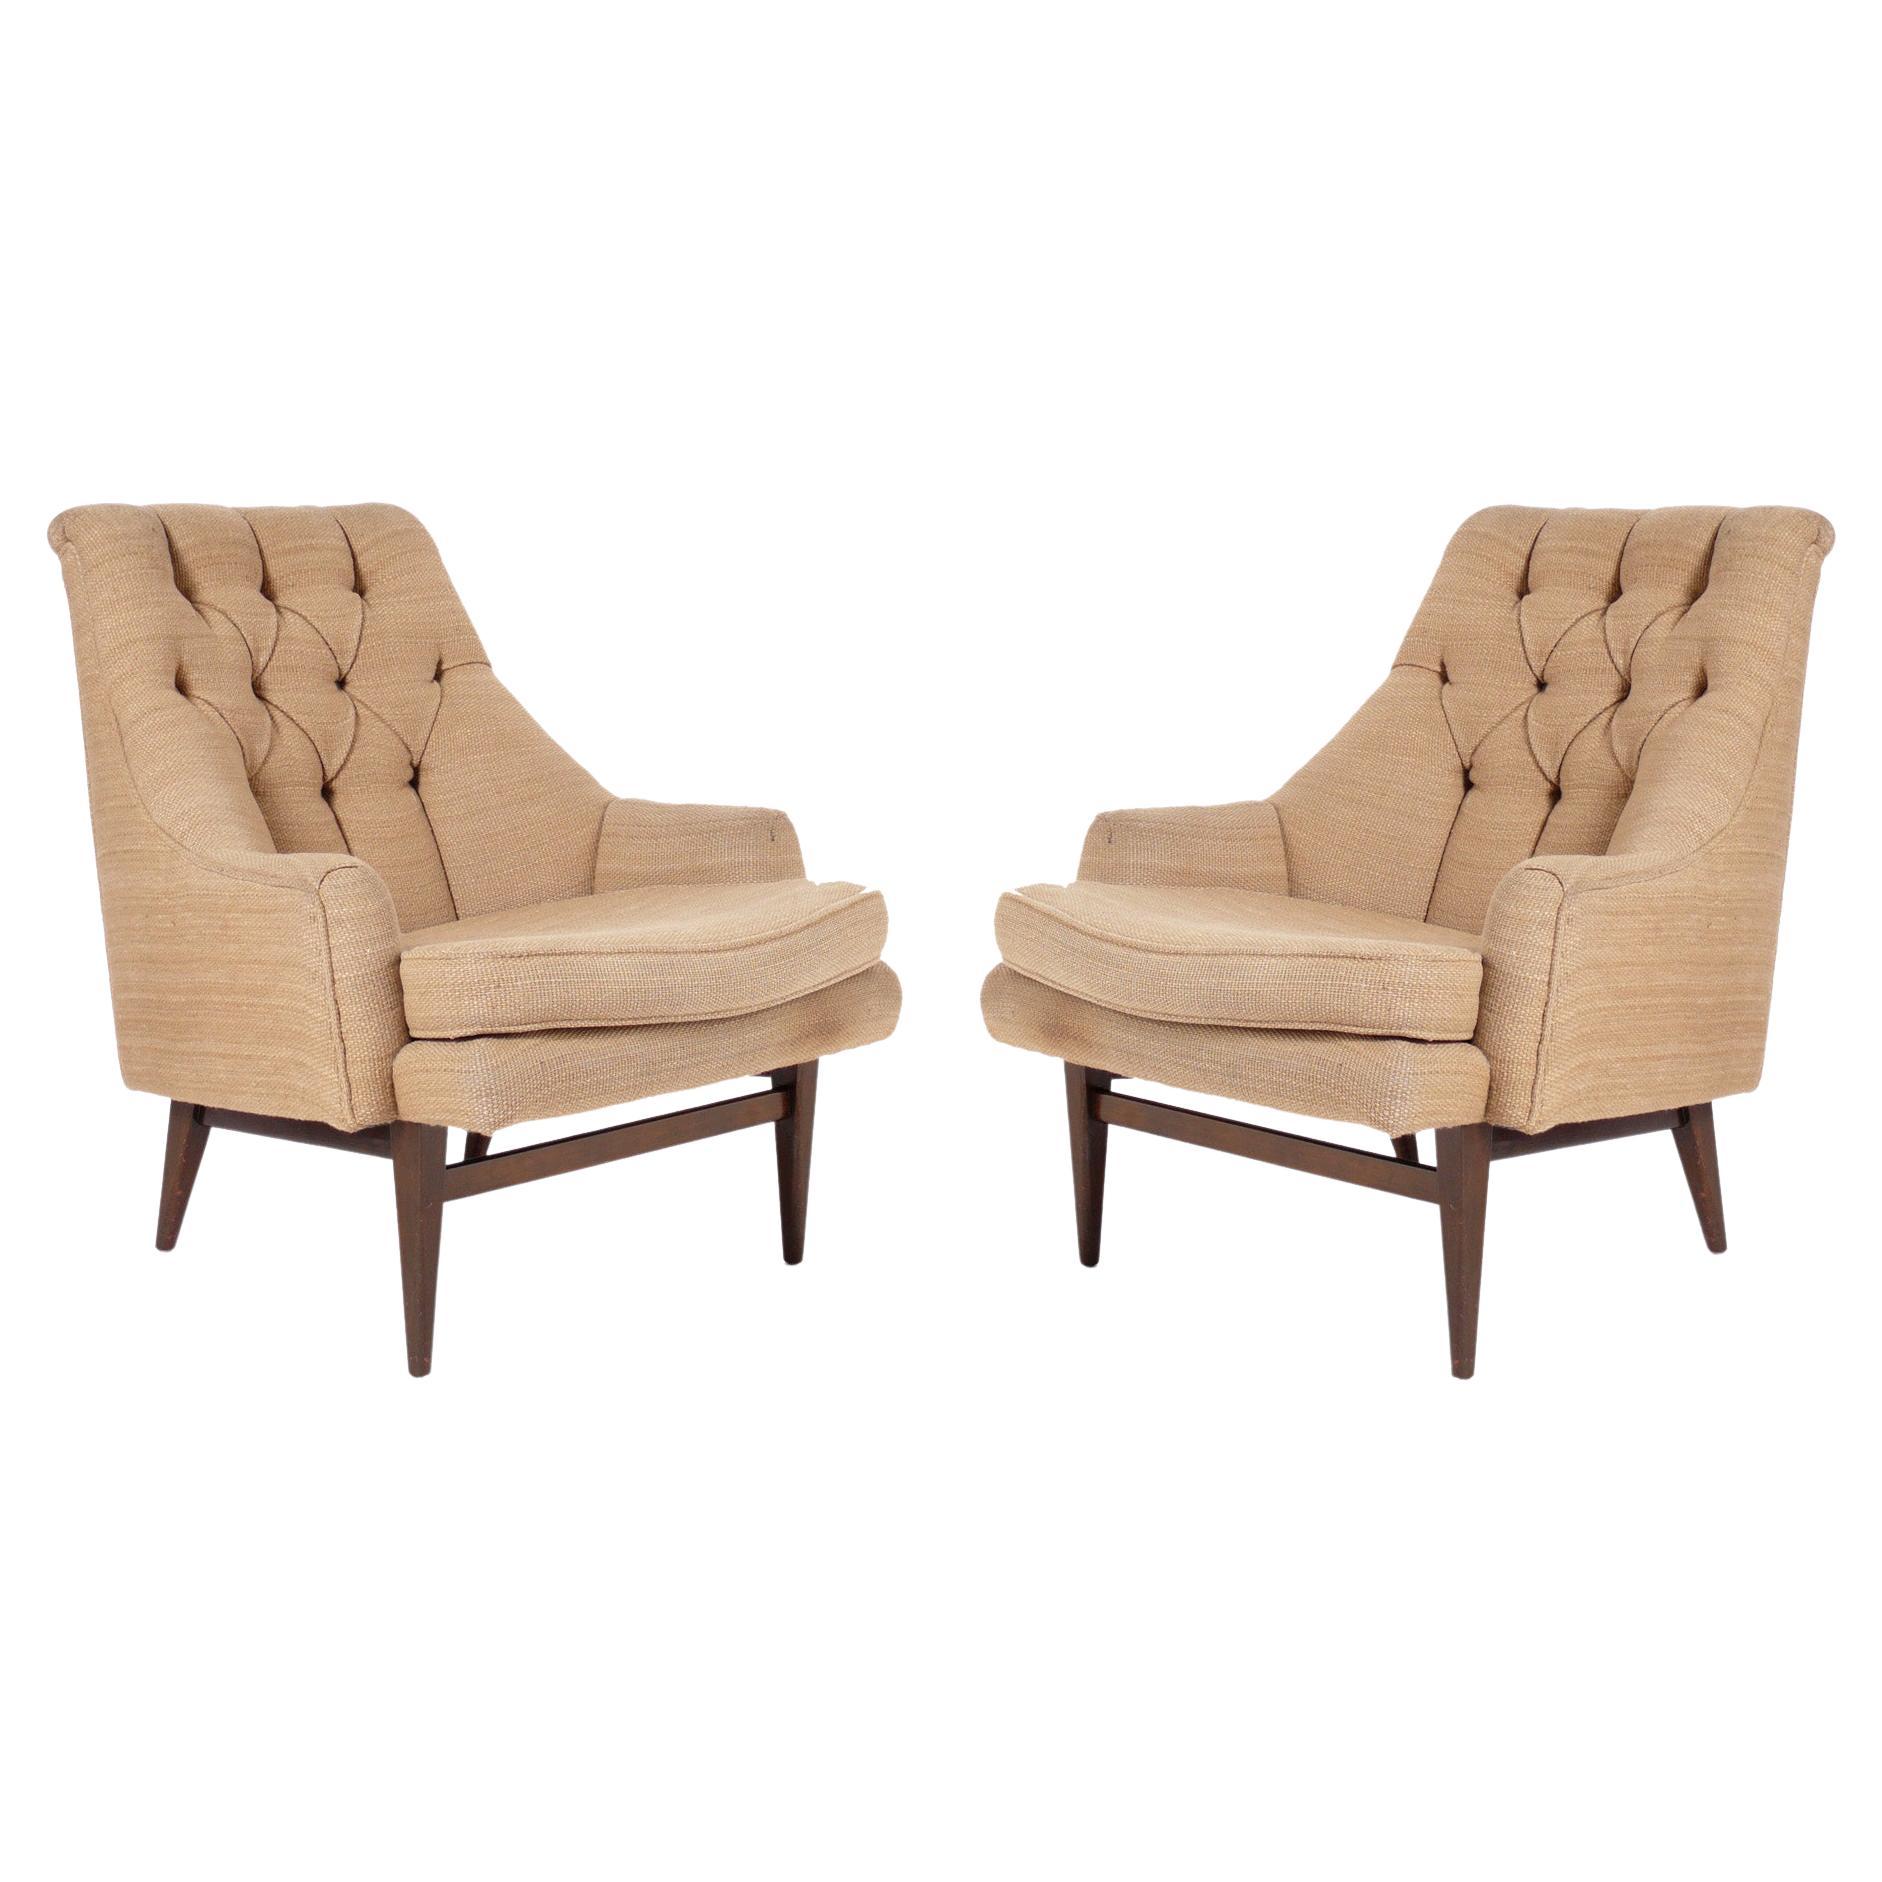 Pair of Curvaceous Tufted Lounge Chairs attributed to Dunbar 